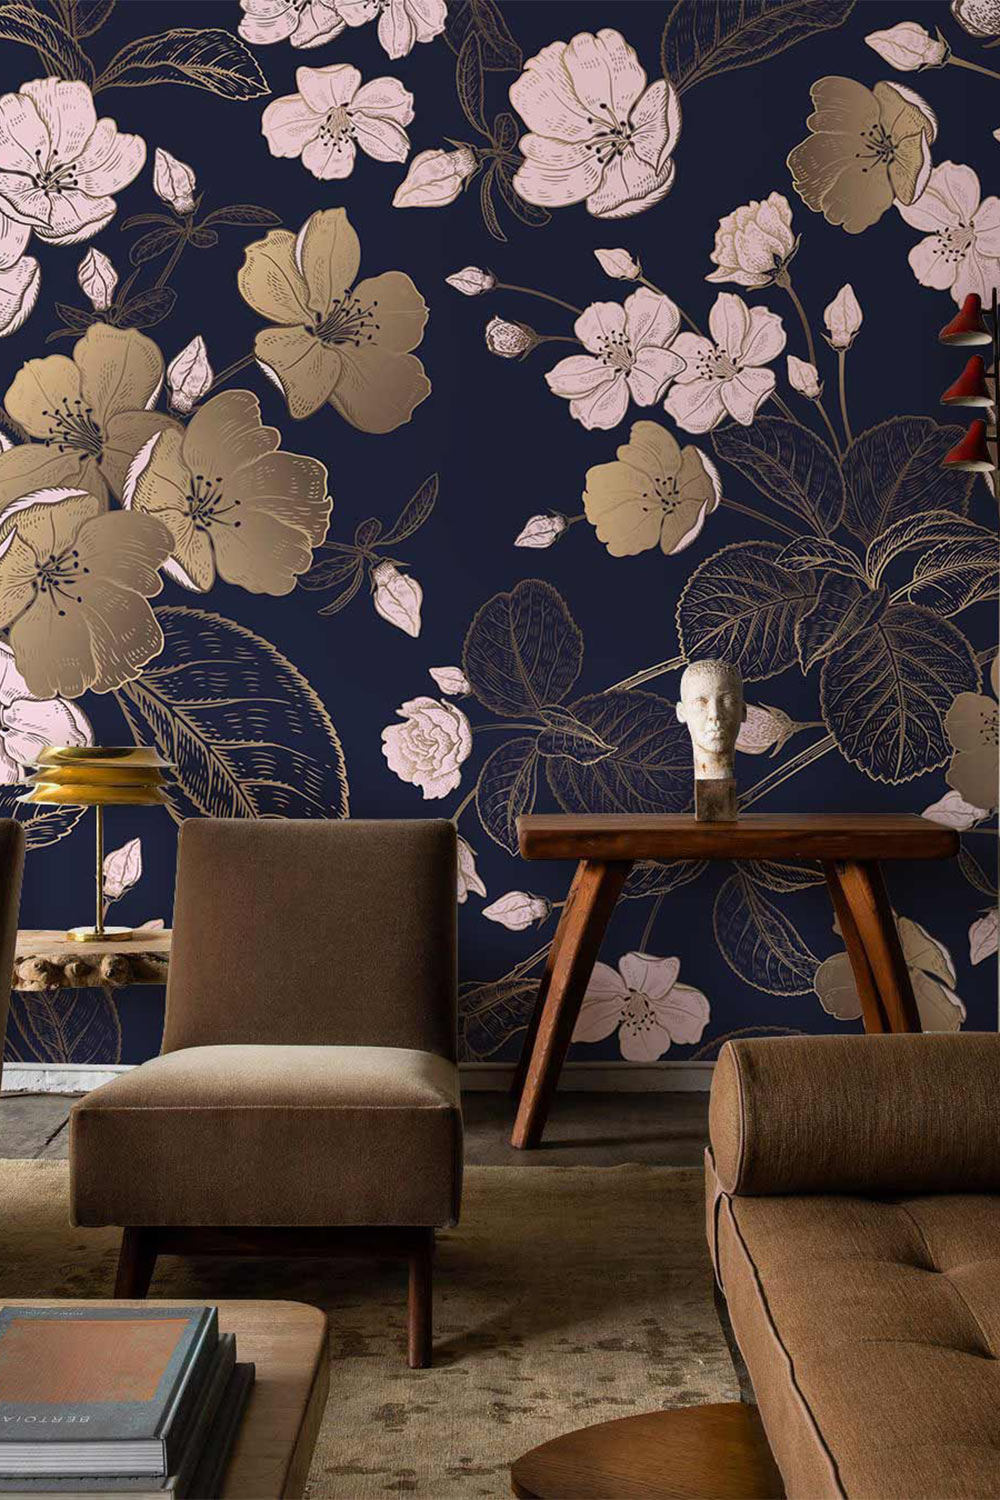 Buy Blue Floral Theme Peel And Stick Self Adhesive Waterproof HD Wallpaper  by 100yellow Online  Natural  Floral Wallpapers  Wallpapers   Furnishings  Pepperfry Product